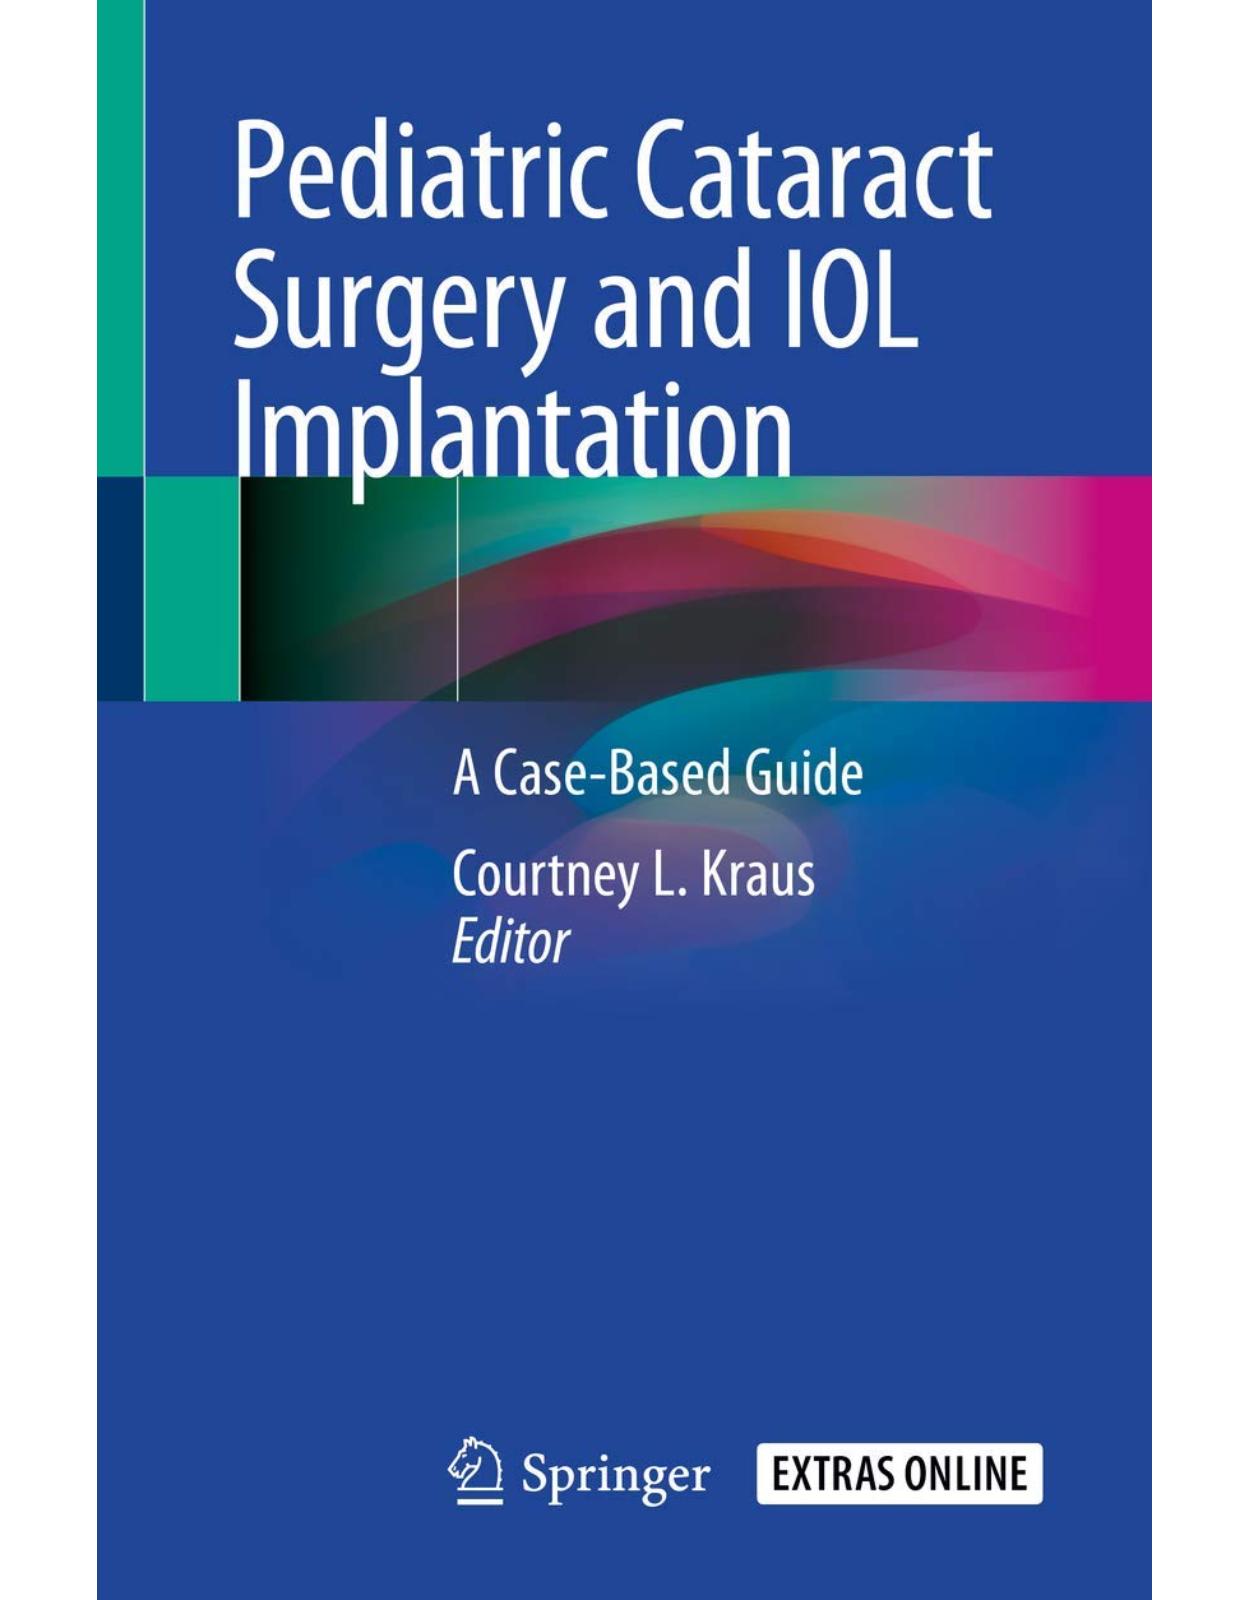 Pediatric Cataract Surgery and IOL Implantation: A Case-Based Guide 